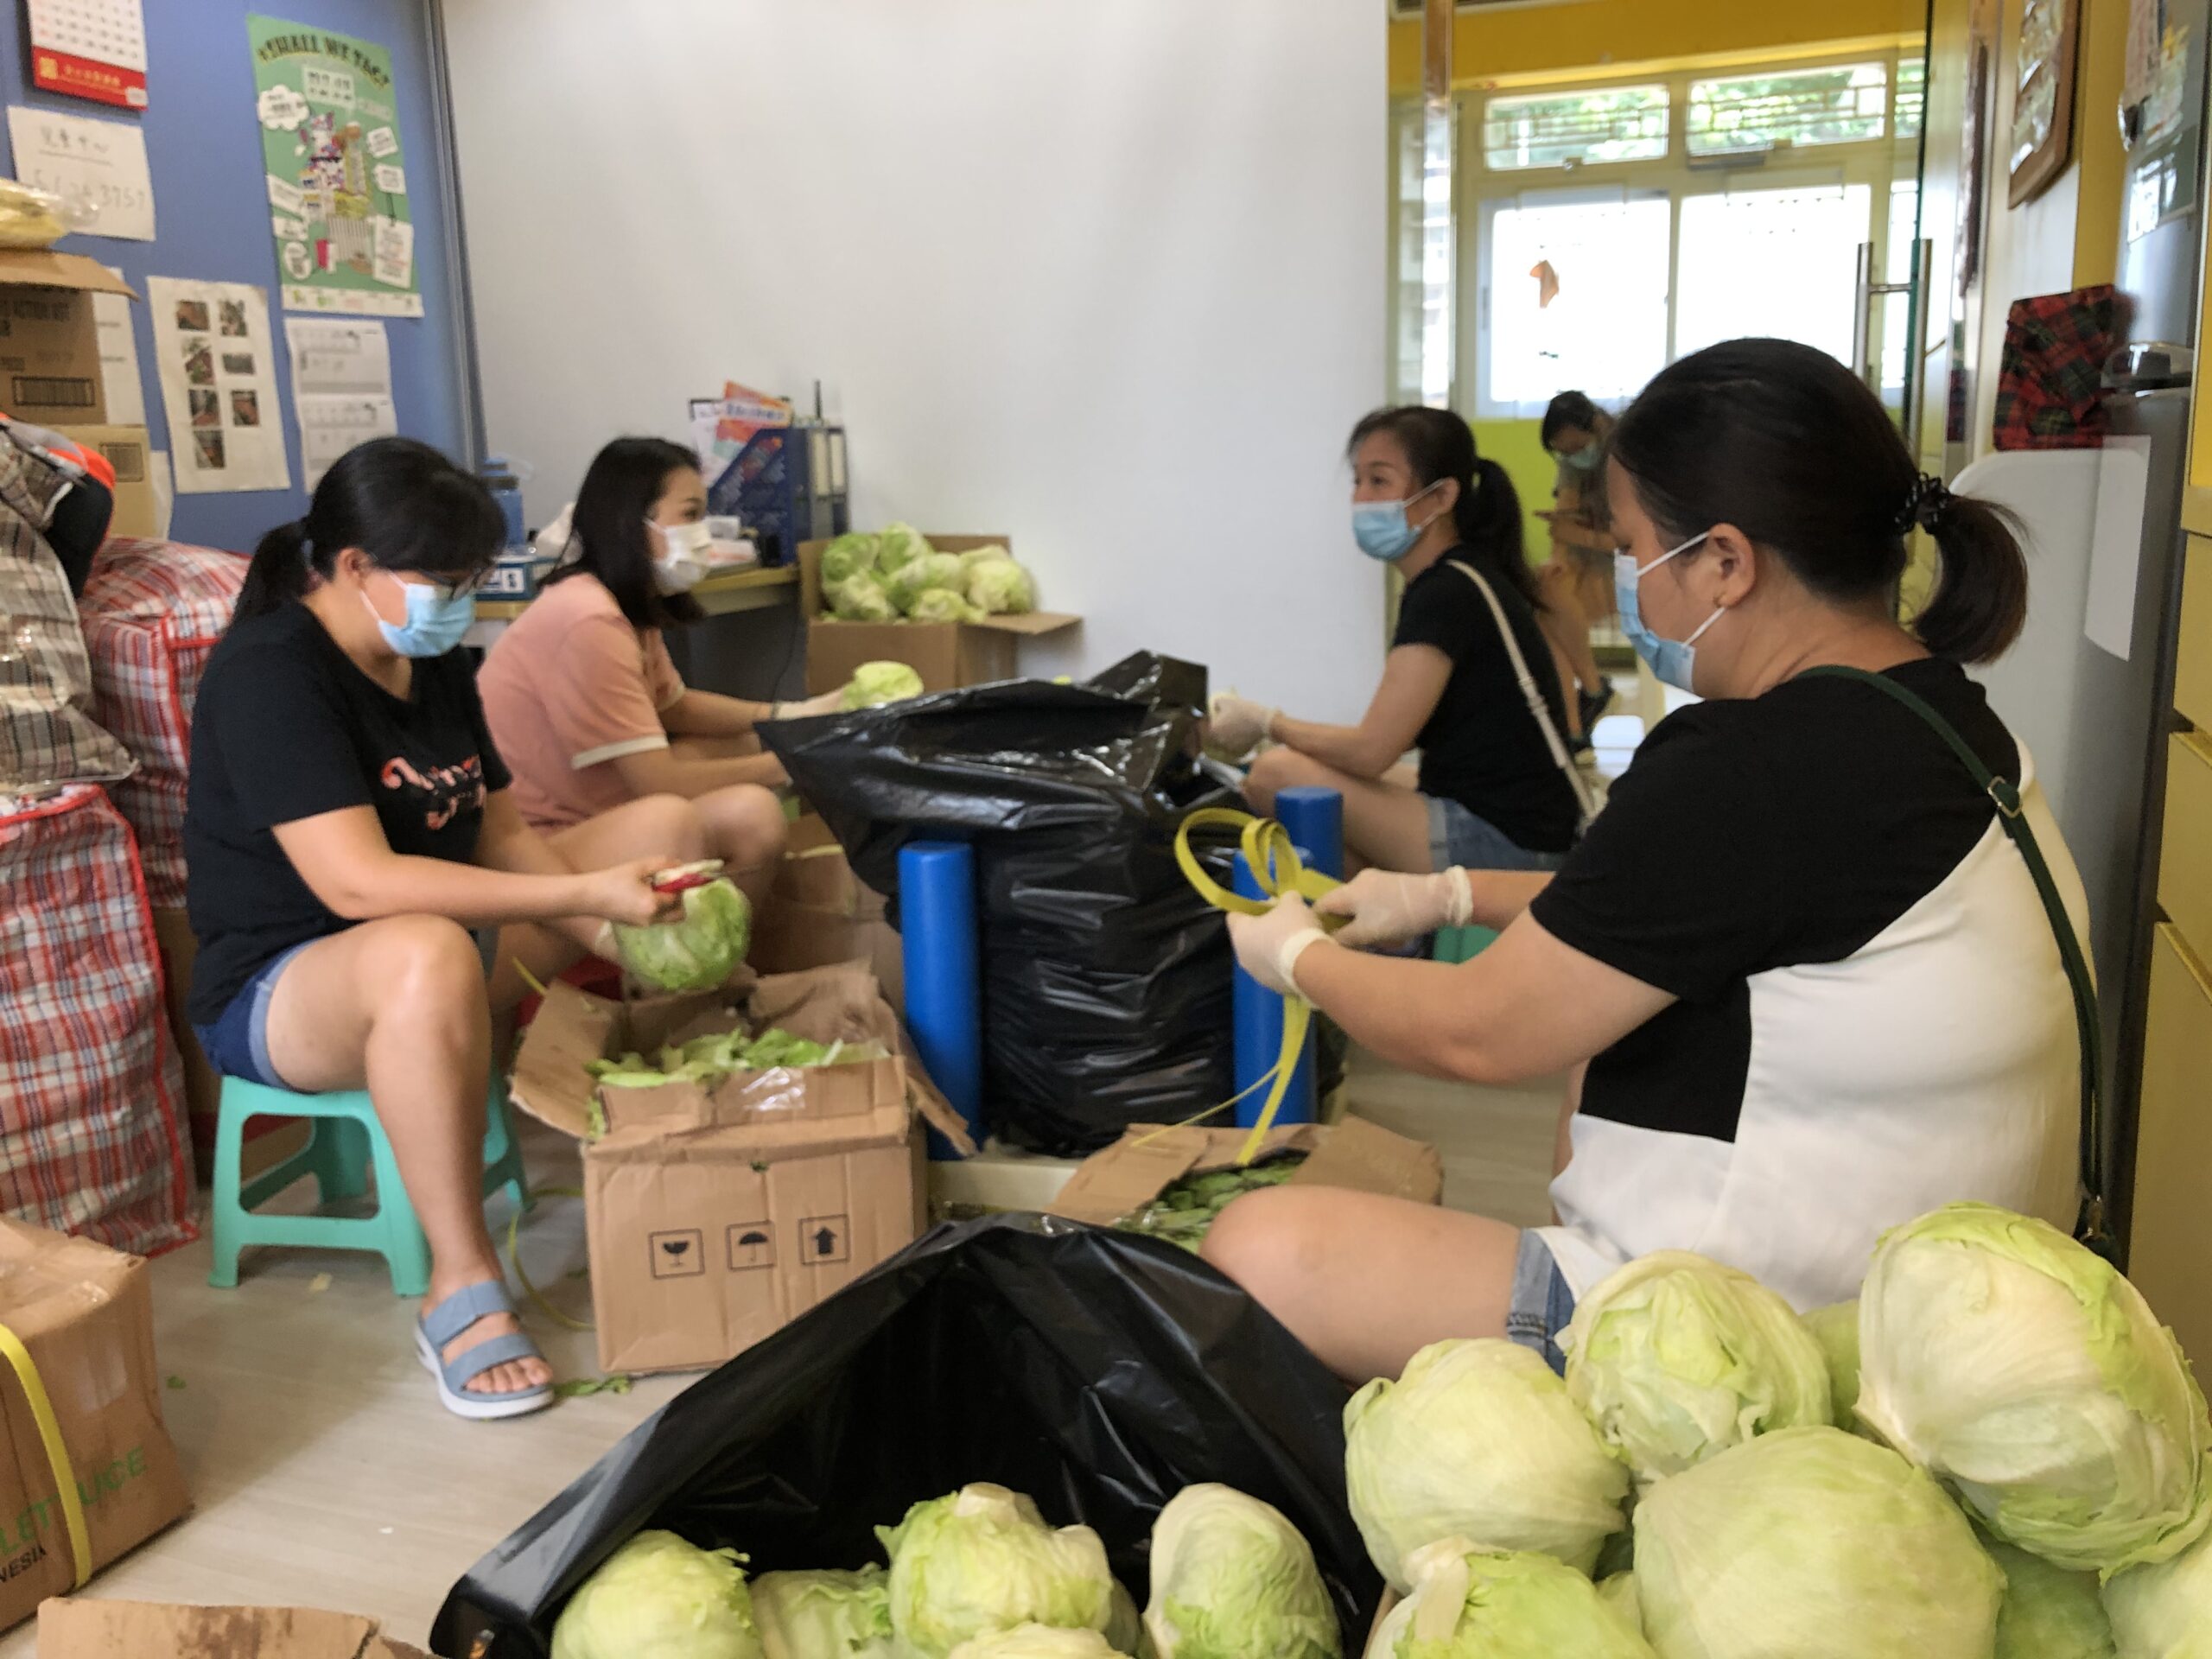 Volunteer activities - Received a donation of lettuce, volunteers assisted in handling and distributing the lettuce